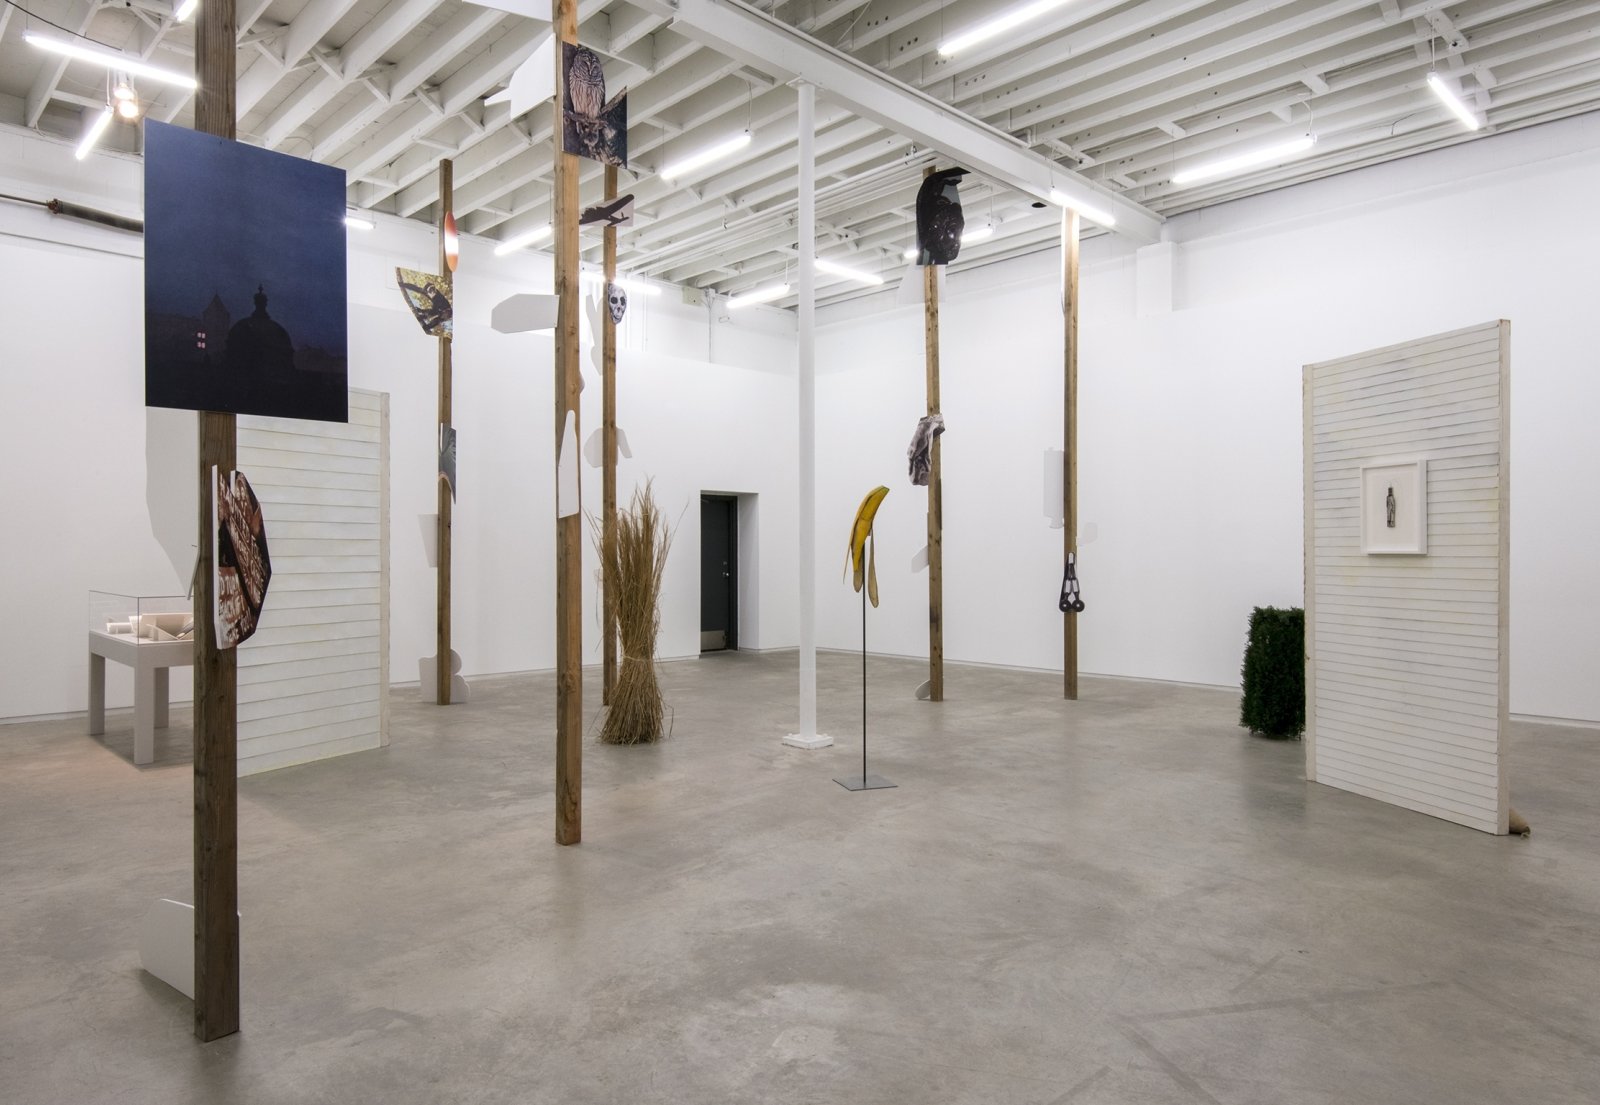 Geoffrey Farmer, installation view, The Grass and the Banana go for a walk, Catriona Jeffries, 2014​​ by Geoffrey Farmer